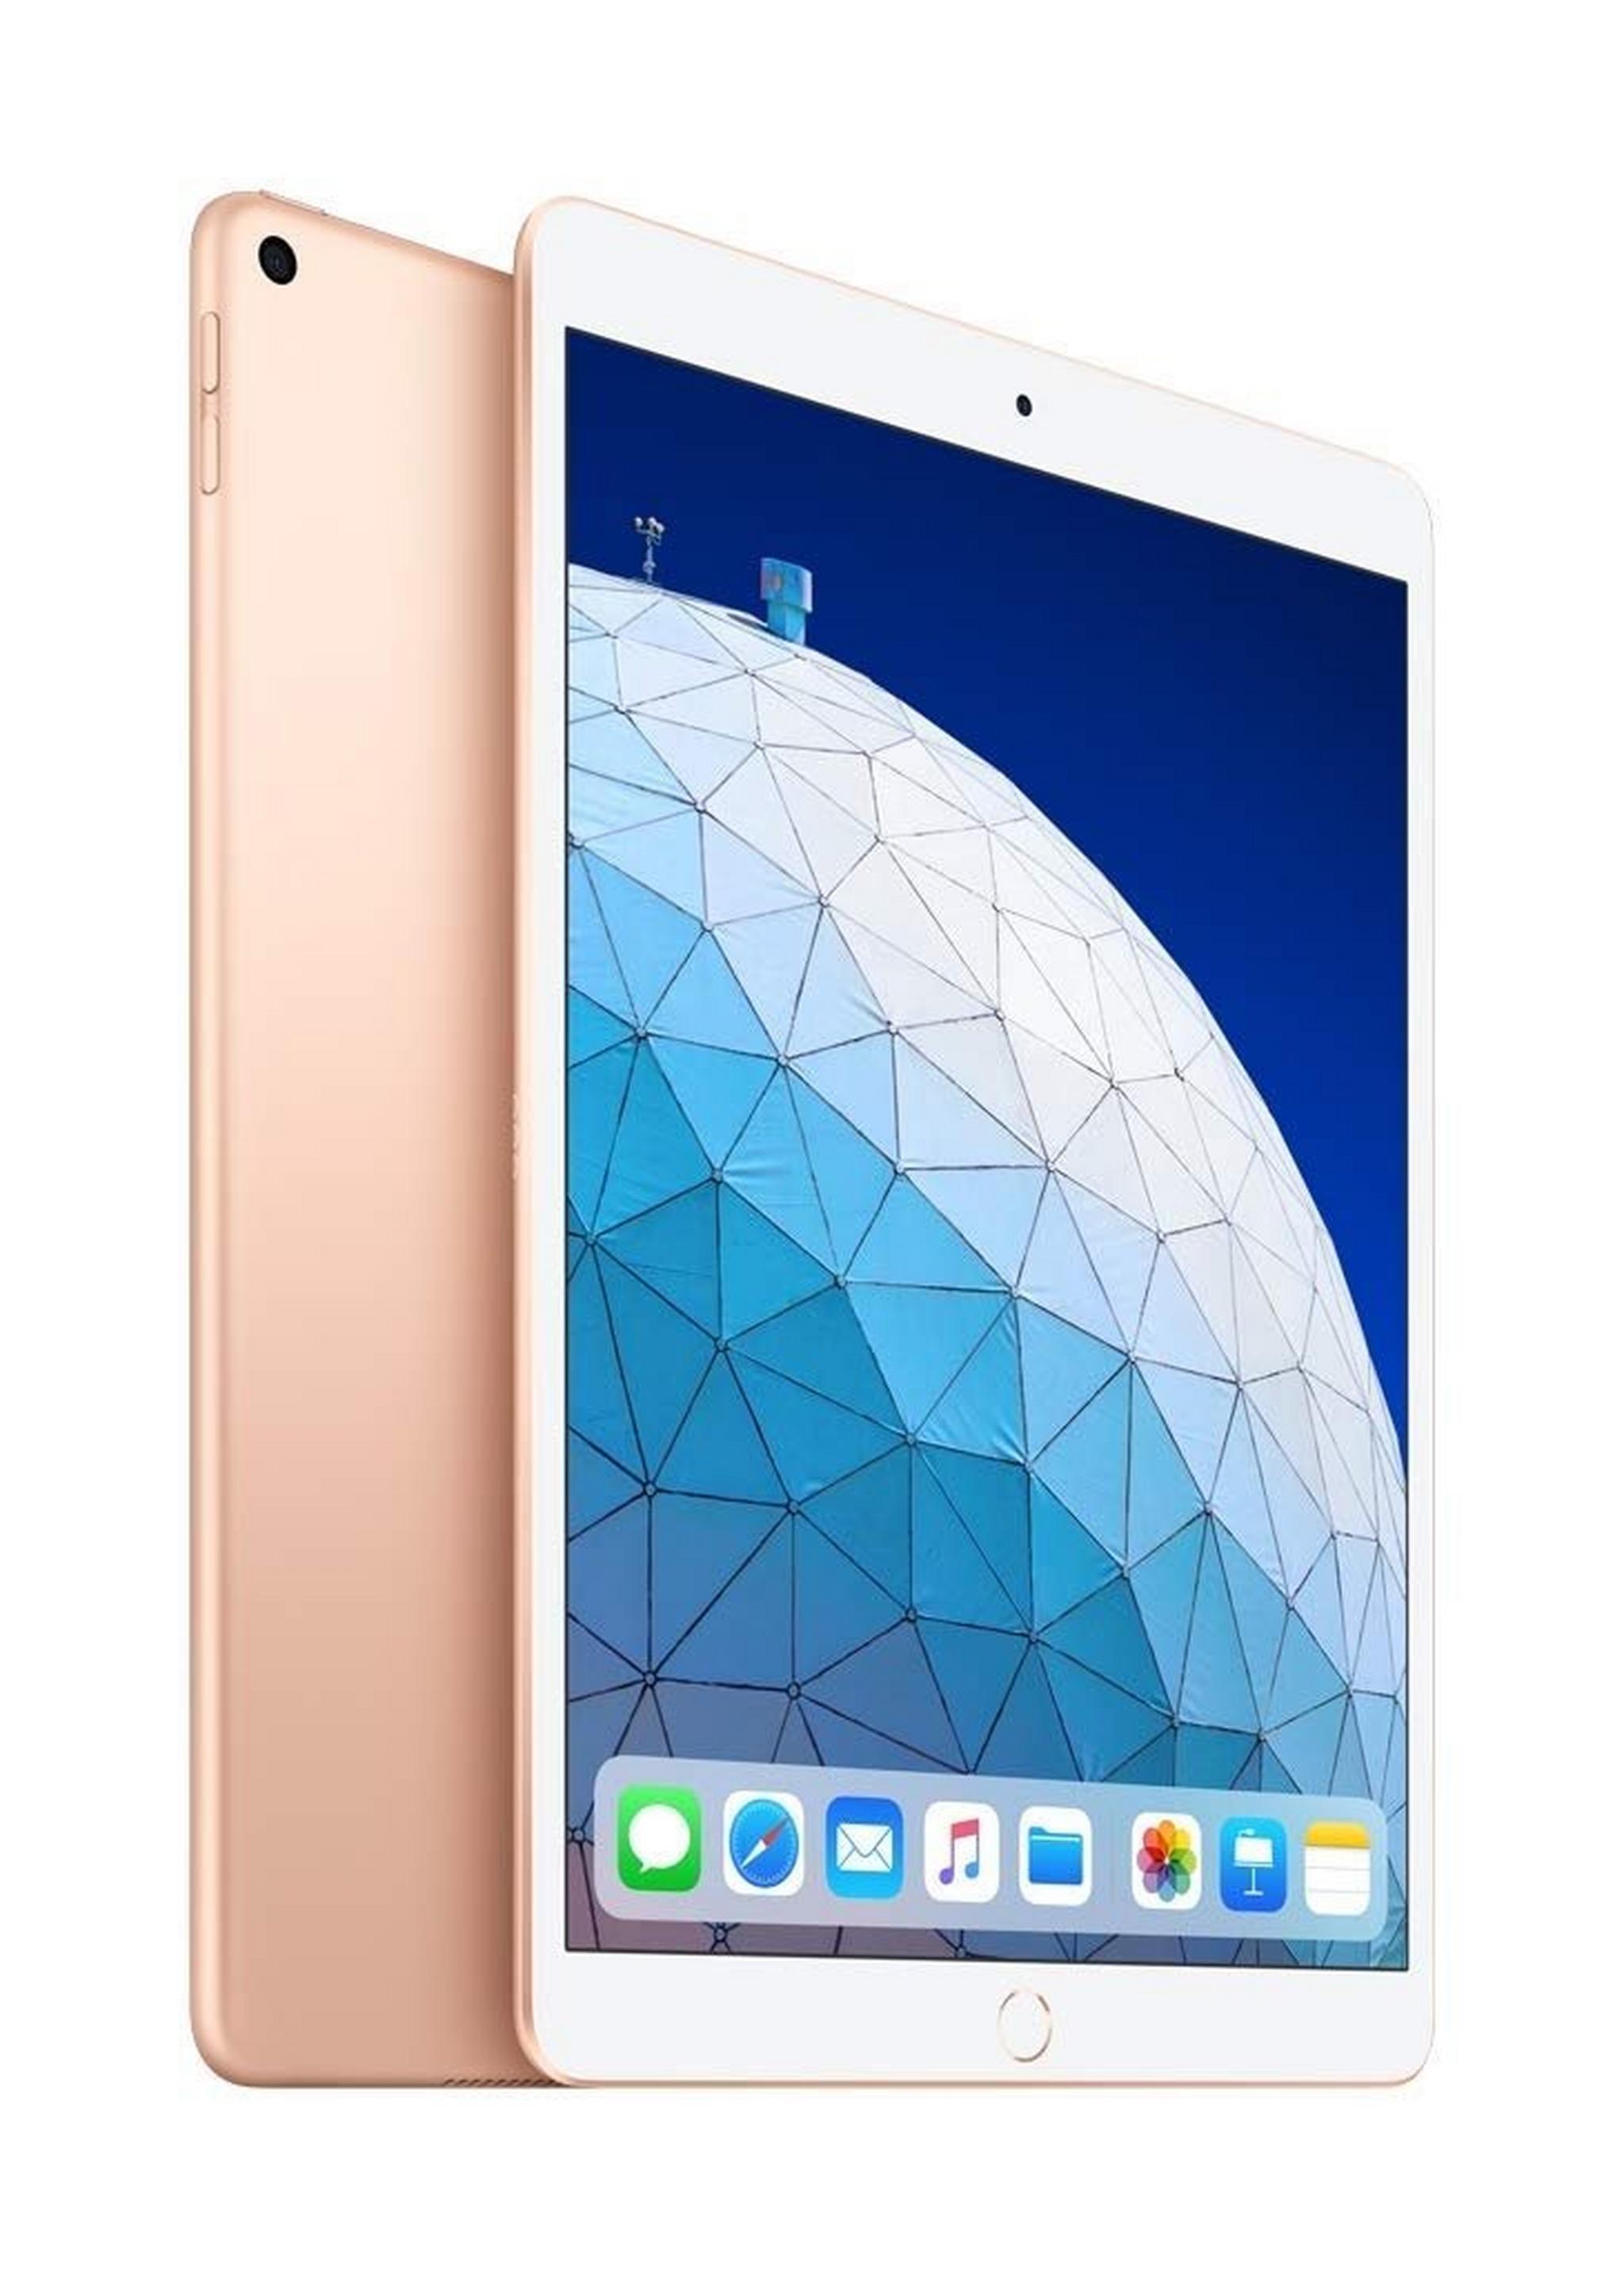 Apple iPad Air 2019 10.5-inch 64GB Wi-Fi Only Tablet - Gold